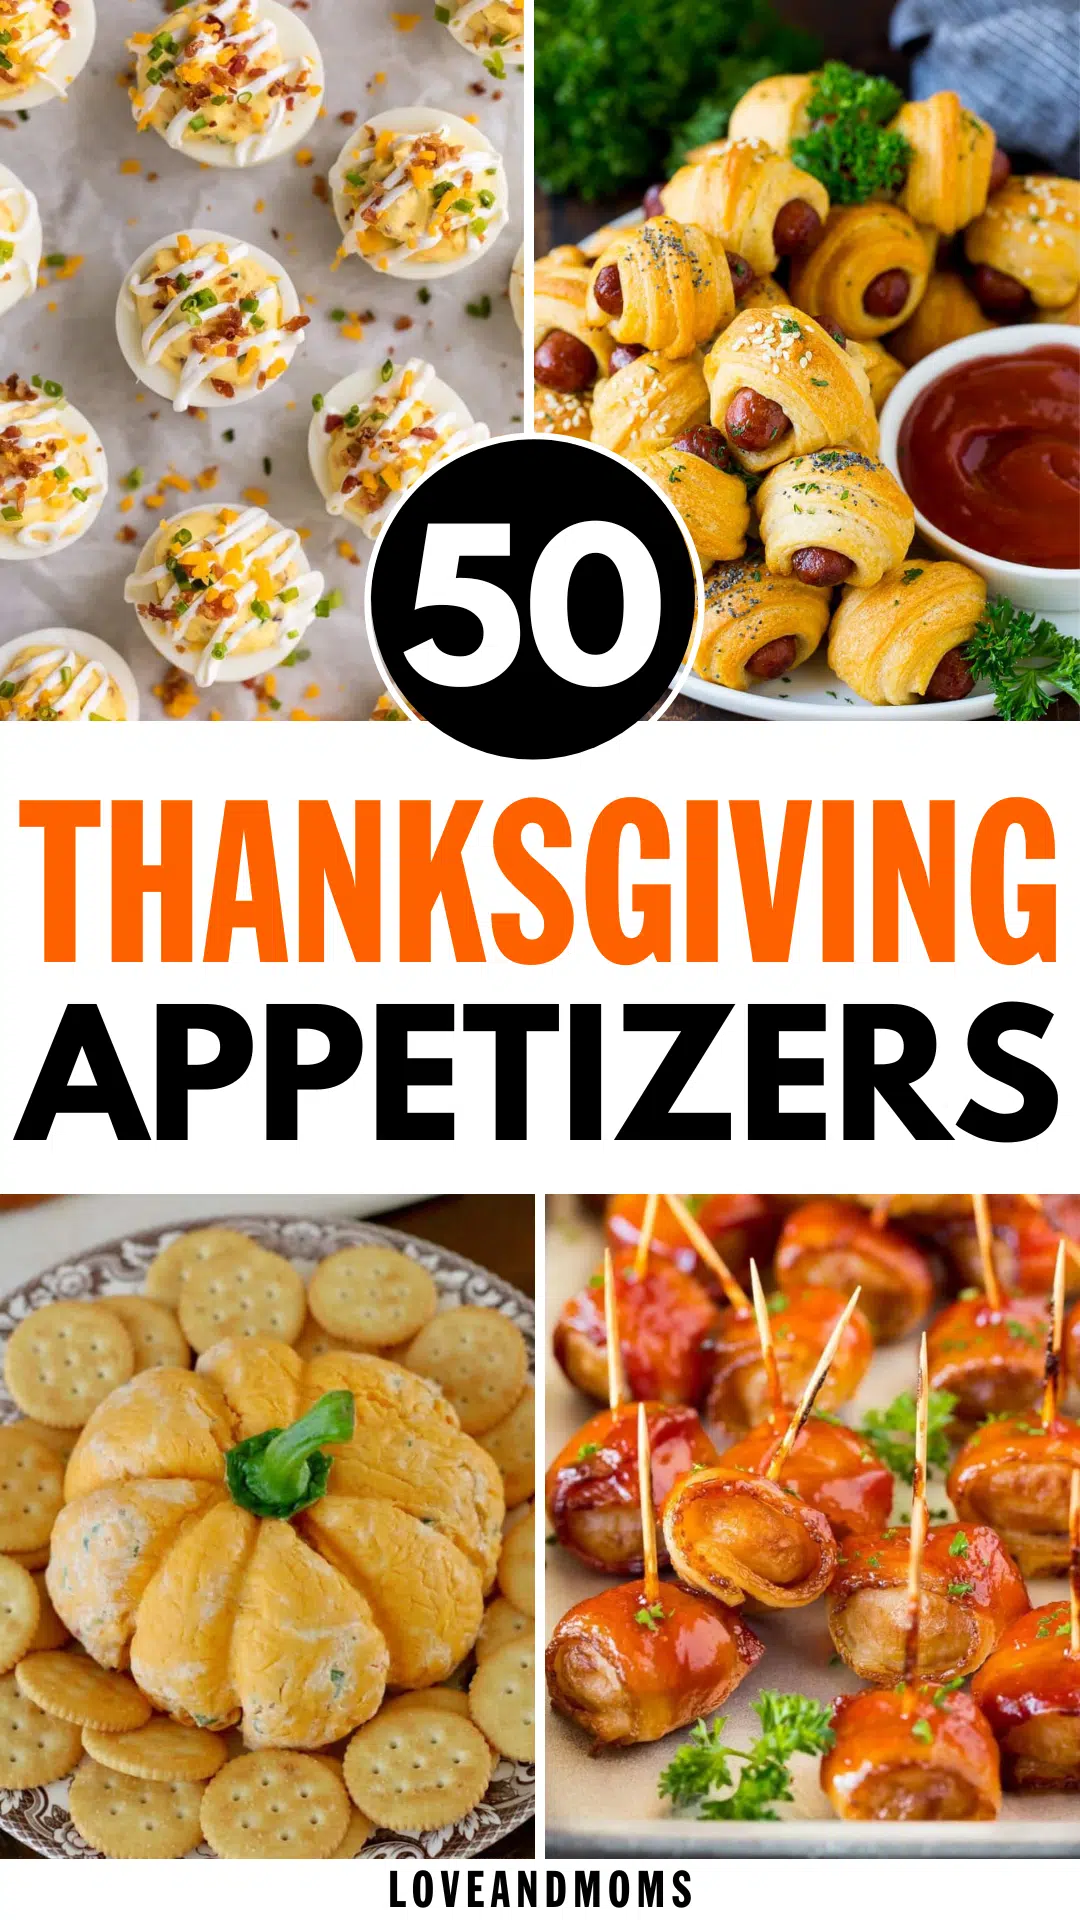 50 Amazing Thanksgiving Appetizers To Try This Year | Love and Moms